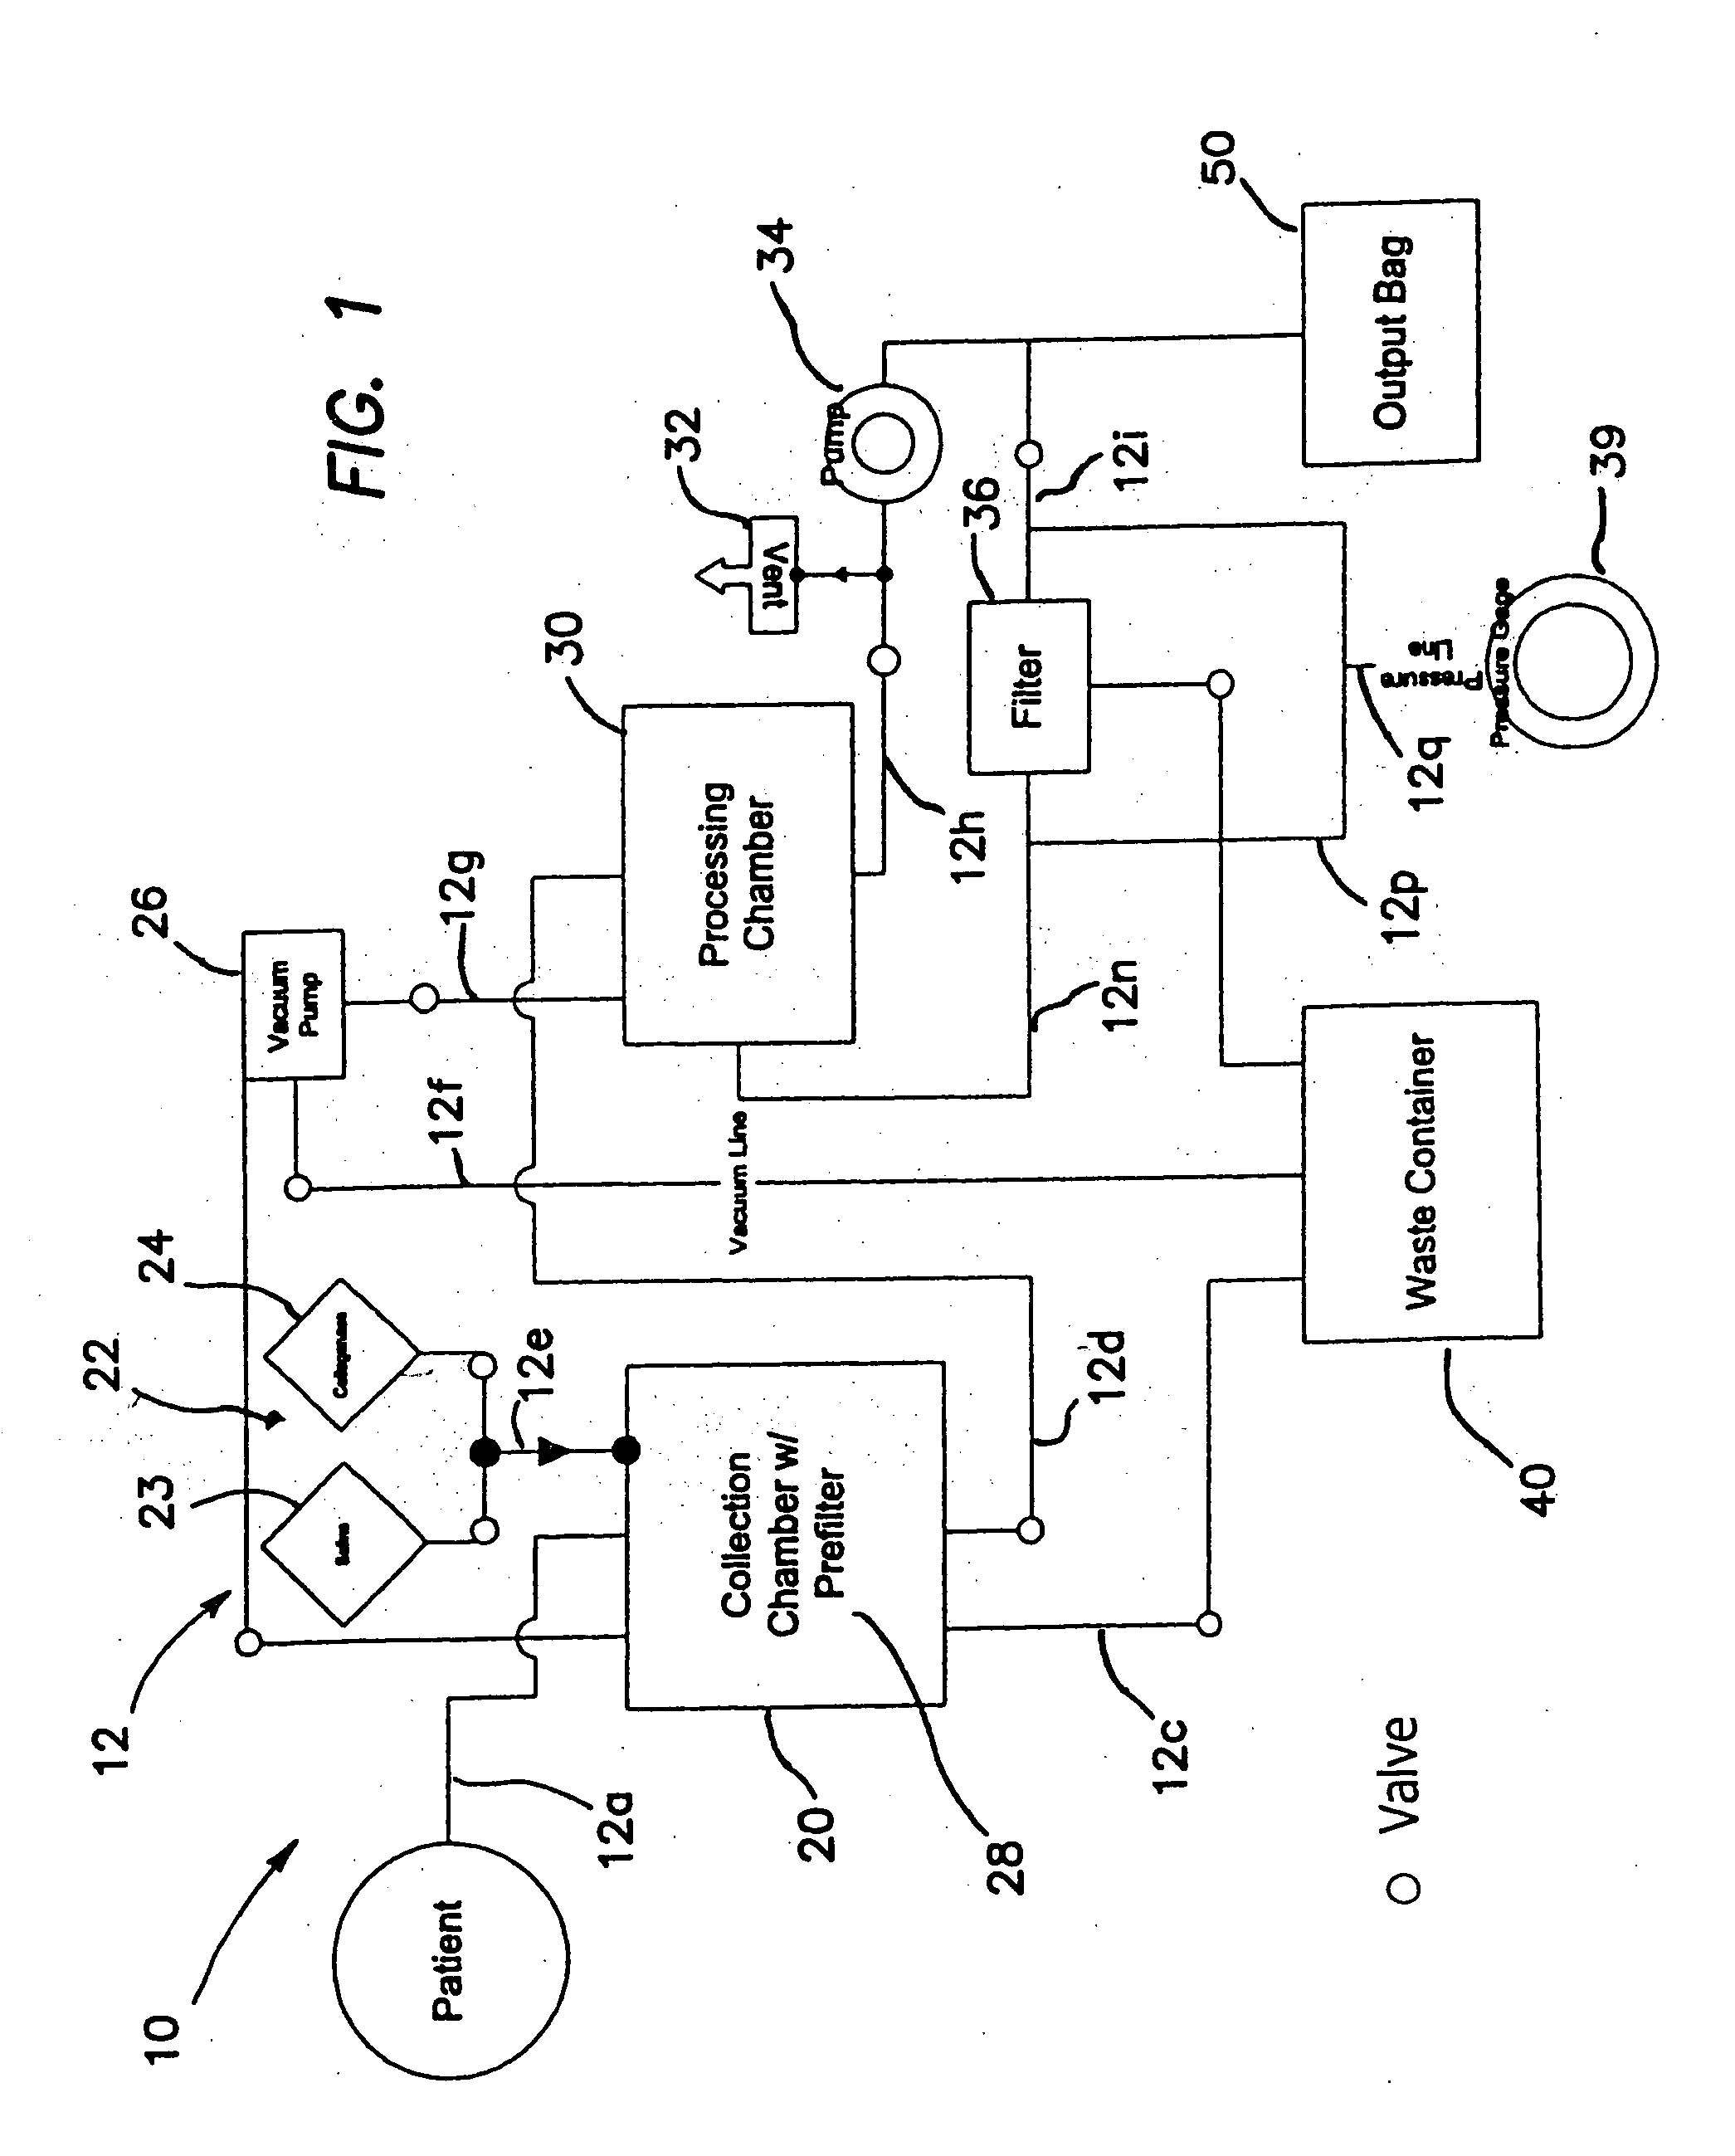 Systems and methods for separating and concentrating regenerative cells from tissue